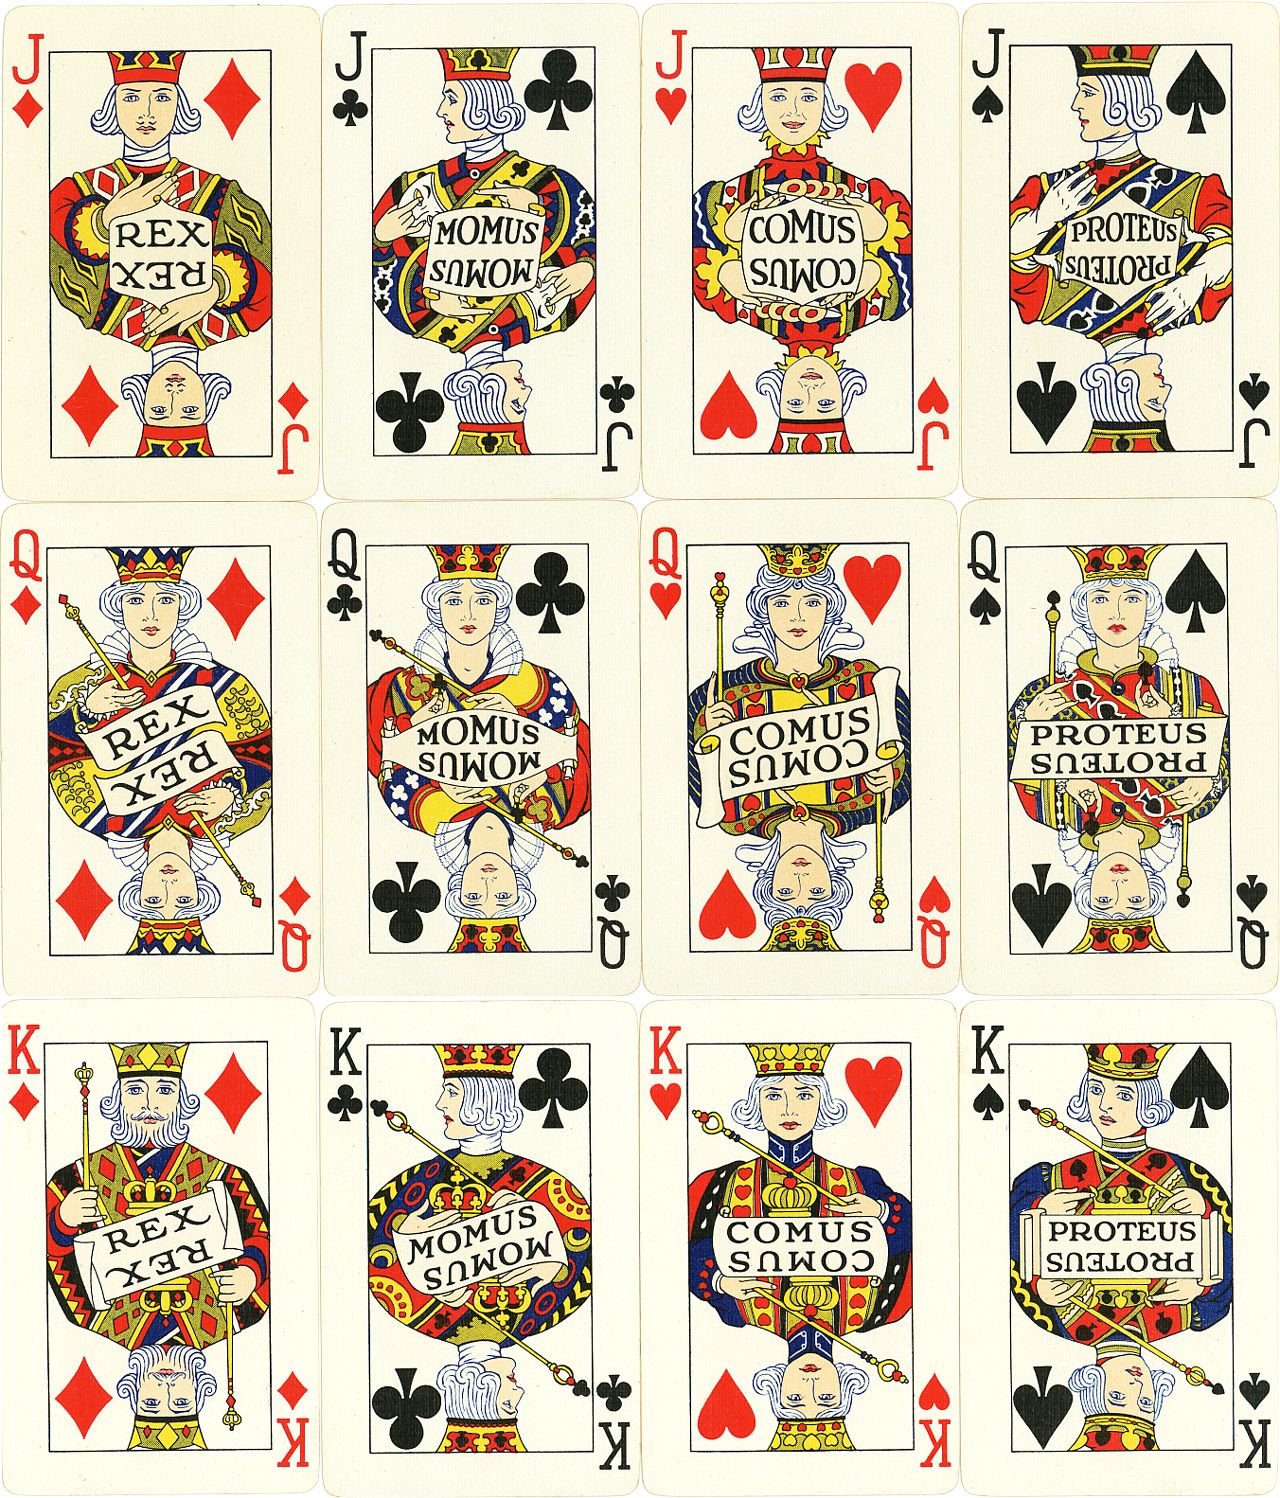 Carnival Playing Cards, designed by Harry D. Wallace (1892-1977) and published in 1925 by the Carnival Playing Card Co., New Orleans